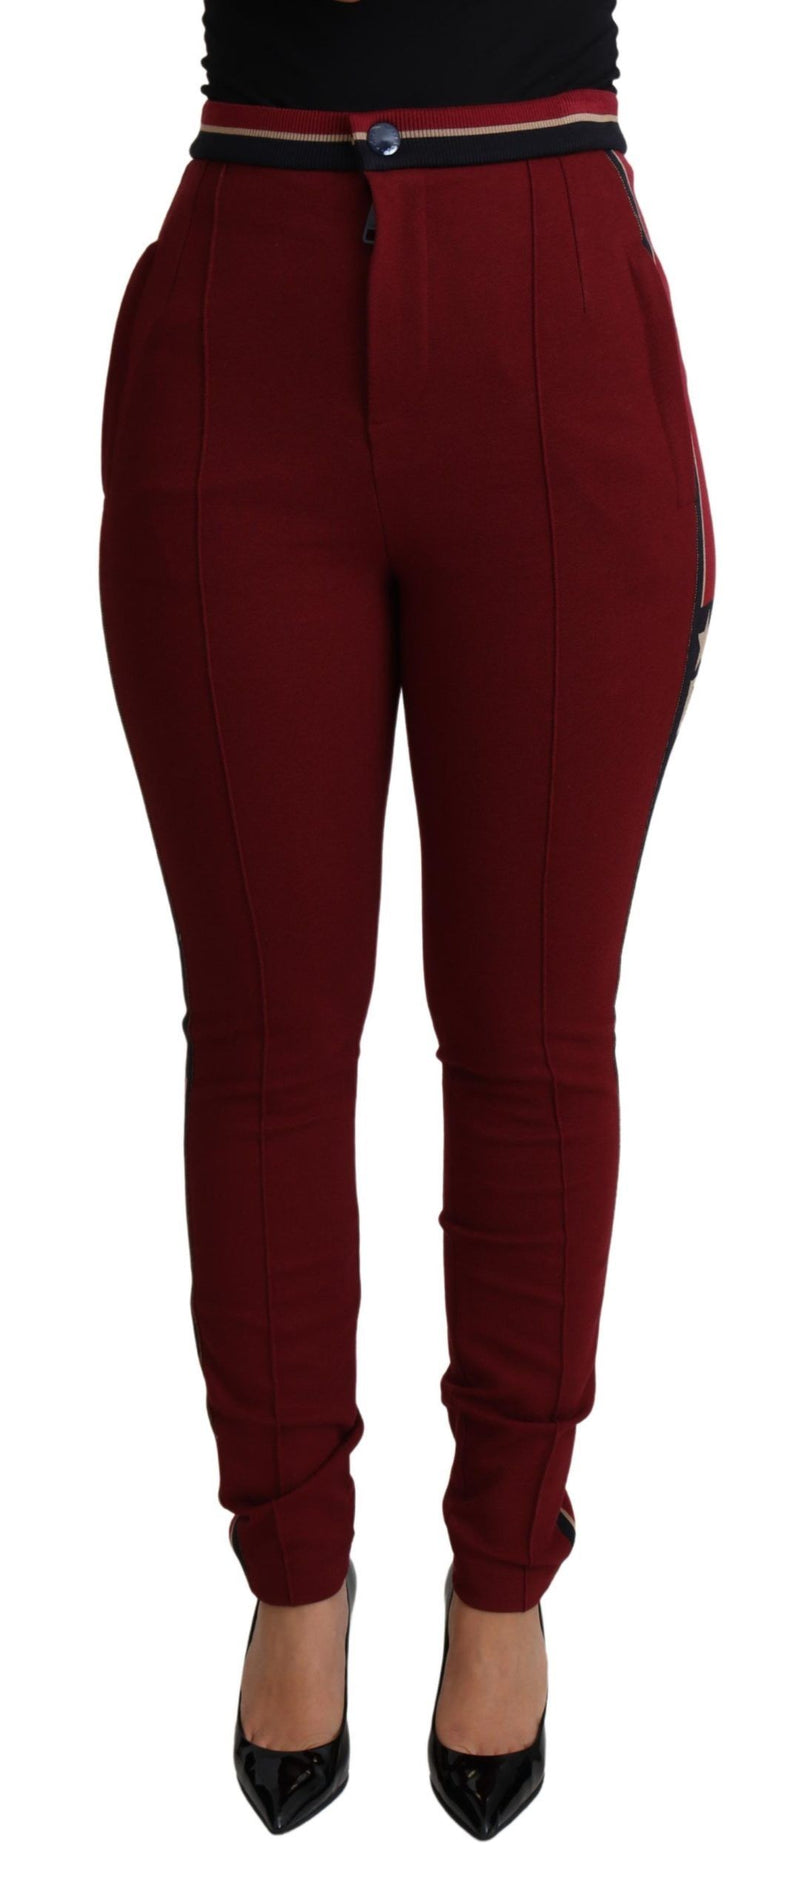 Dolce & Gabbana High-Waist Embroidered Red Skinny Women's Trousers